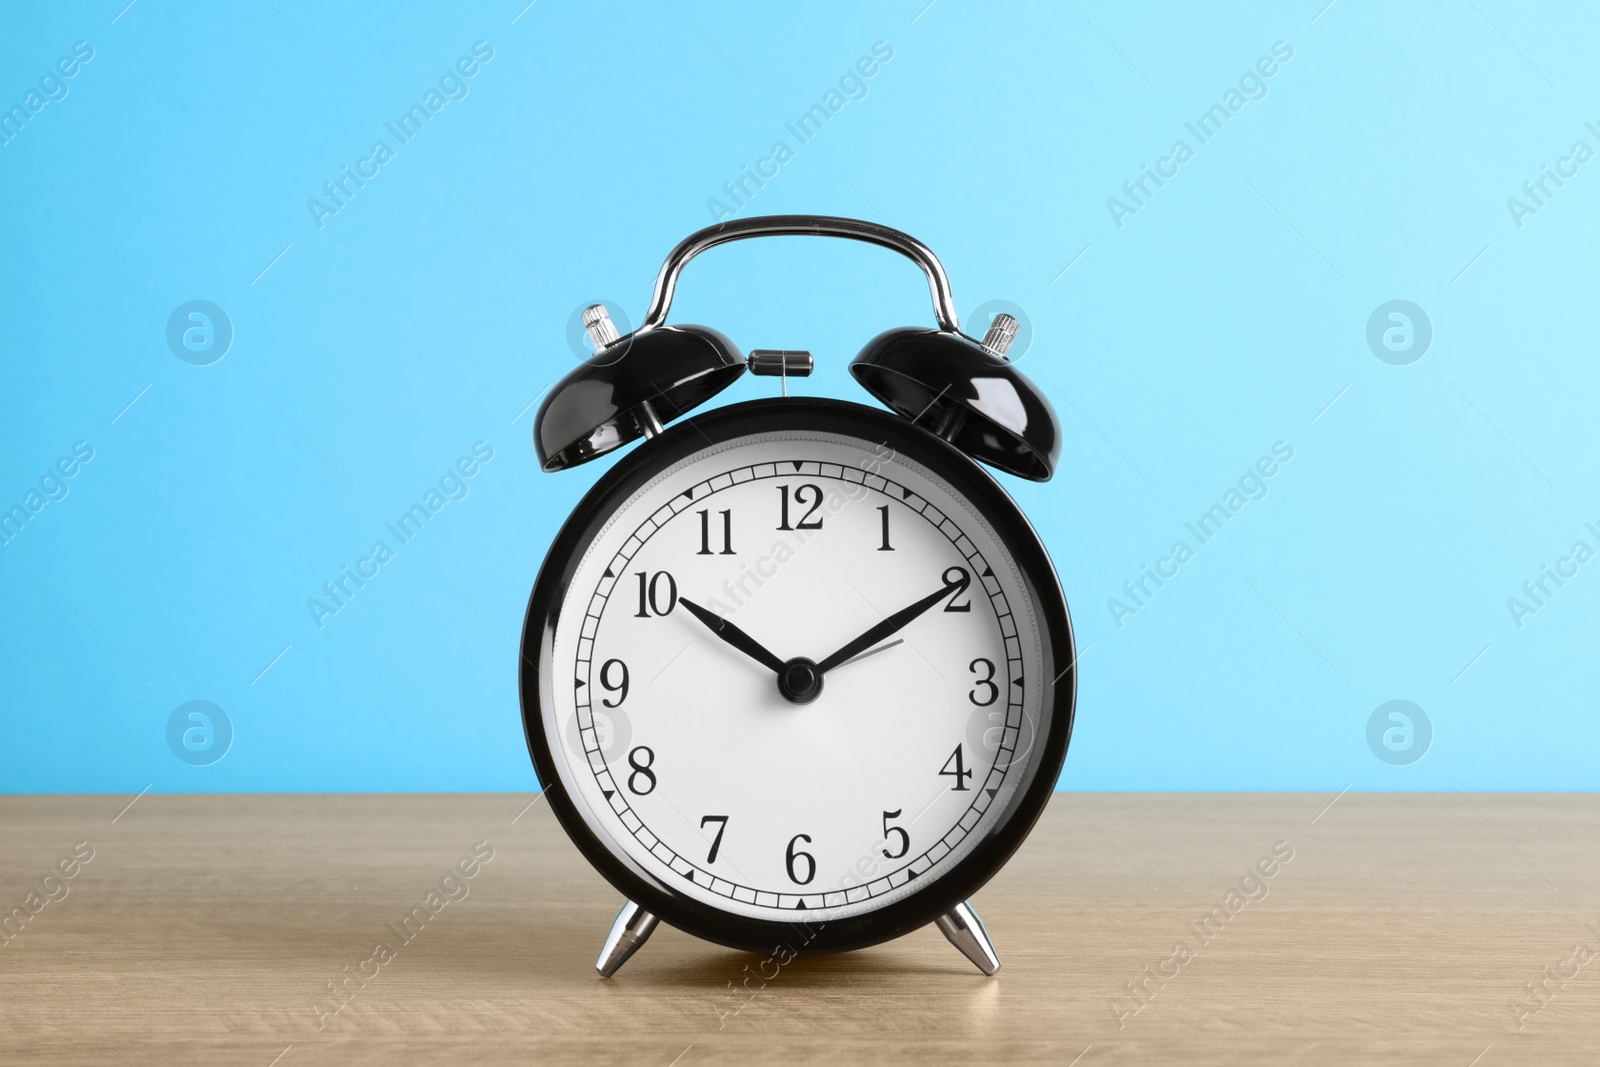 Photo of Black alarm clock on wooden table against light blue background